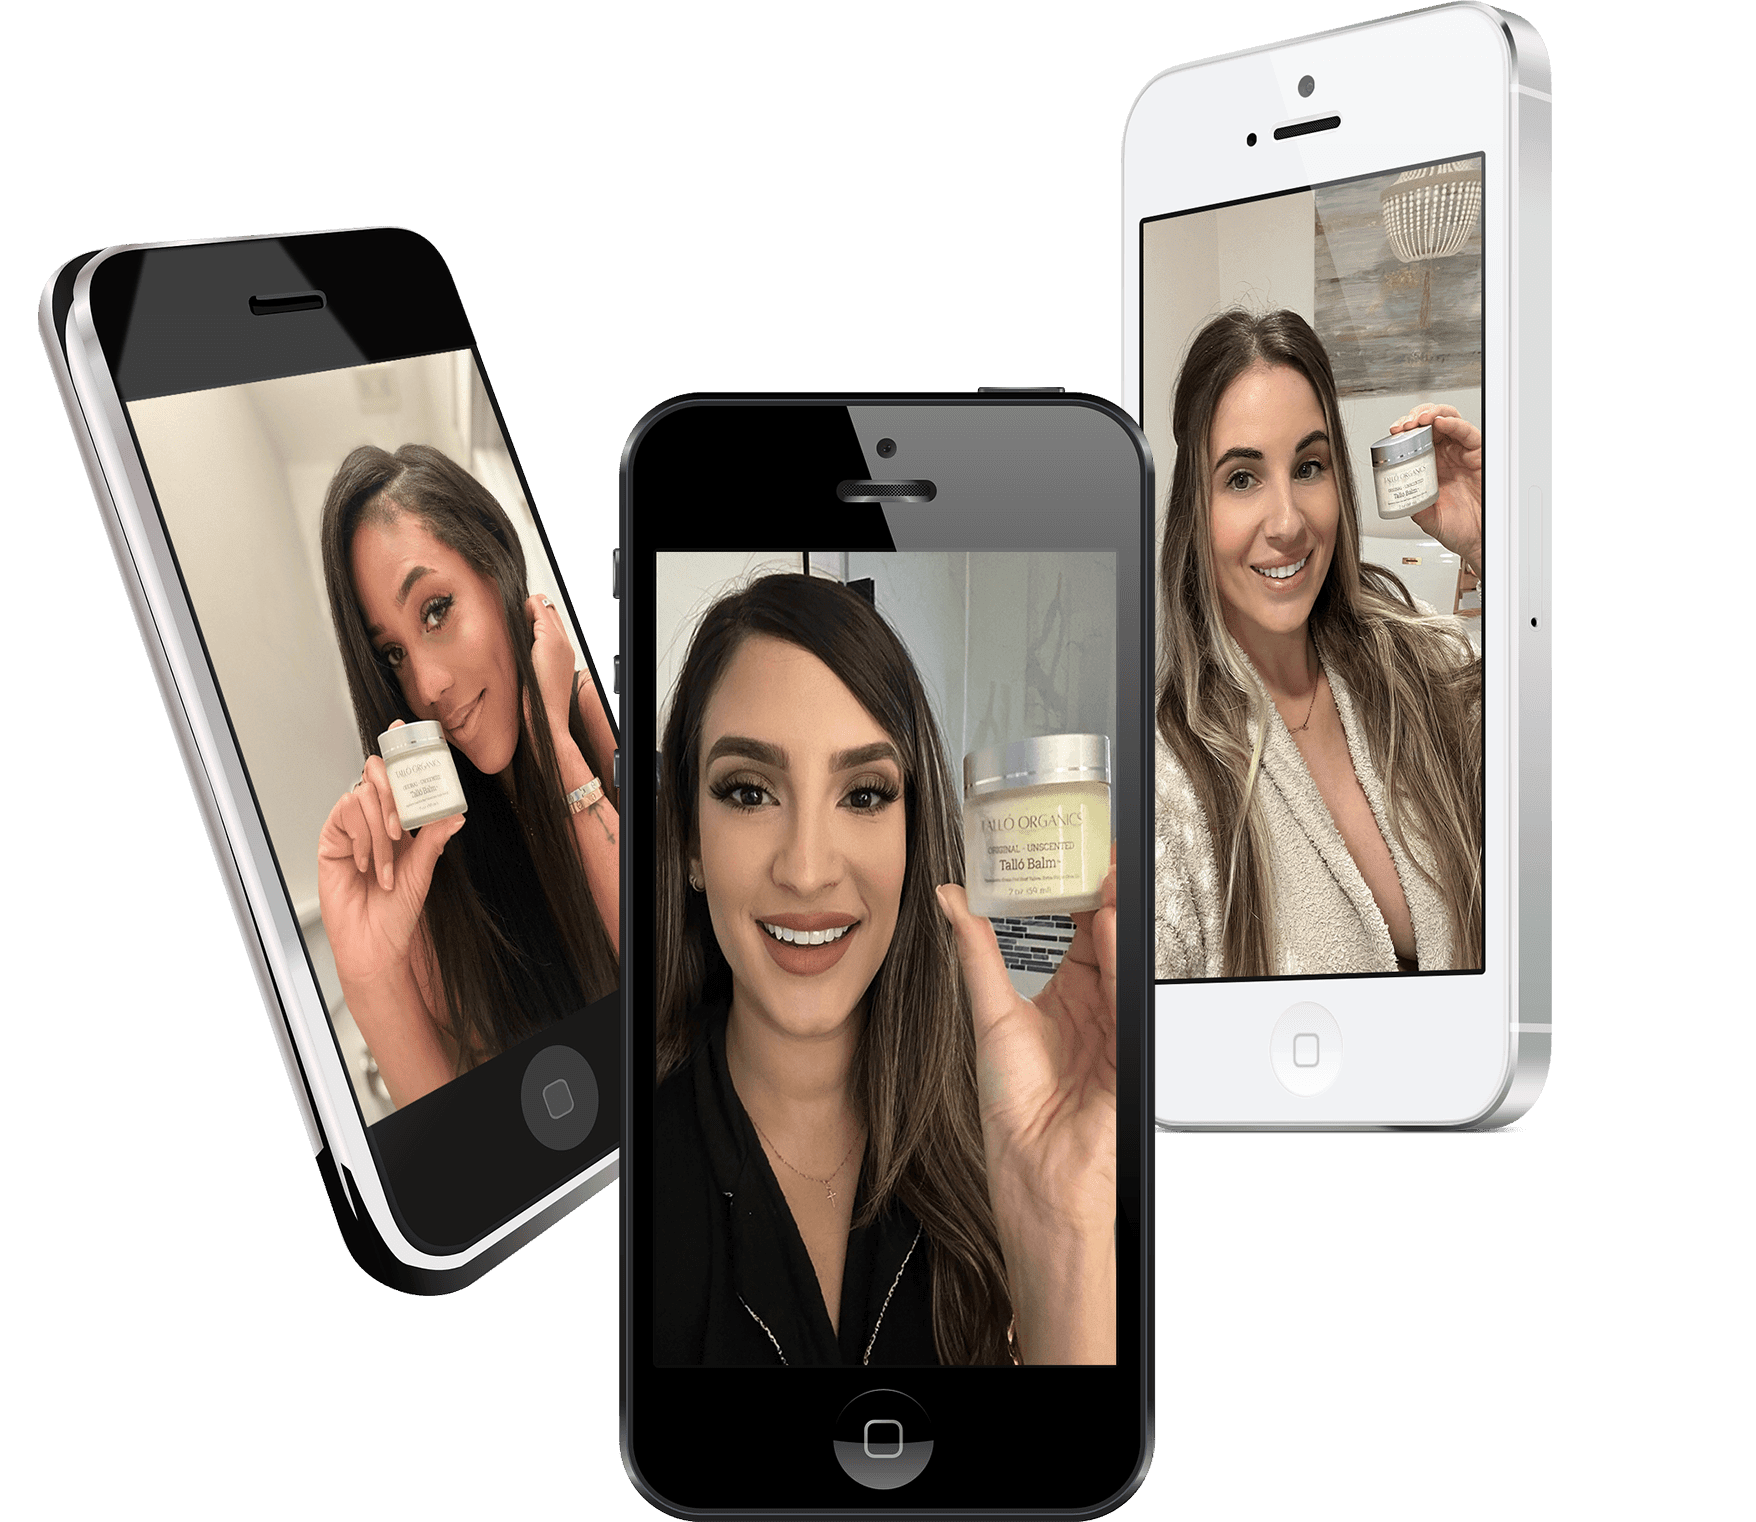 User photos where they users are holding their jars of Tallo Balm. Photos include: Bria Brown (Left), Fernanda Scherrer (Bottom), Jennifer Lack Hannan (Right)